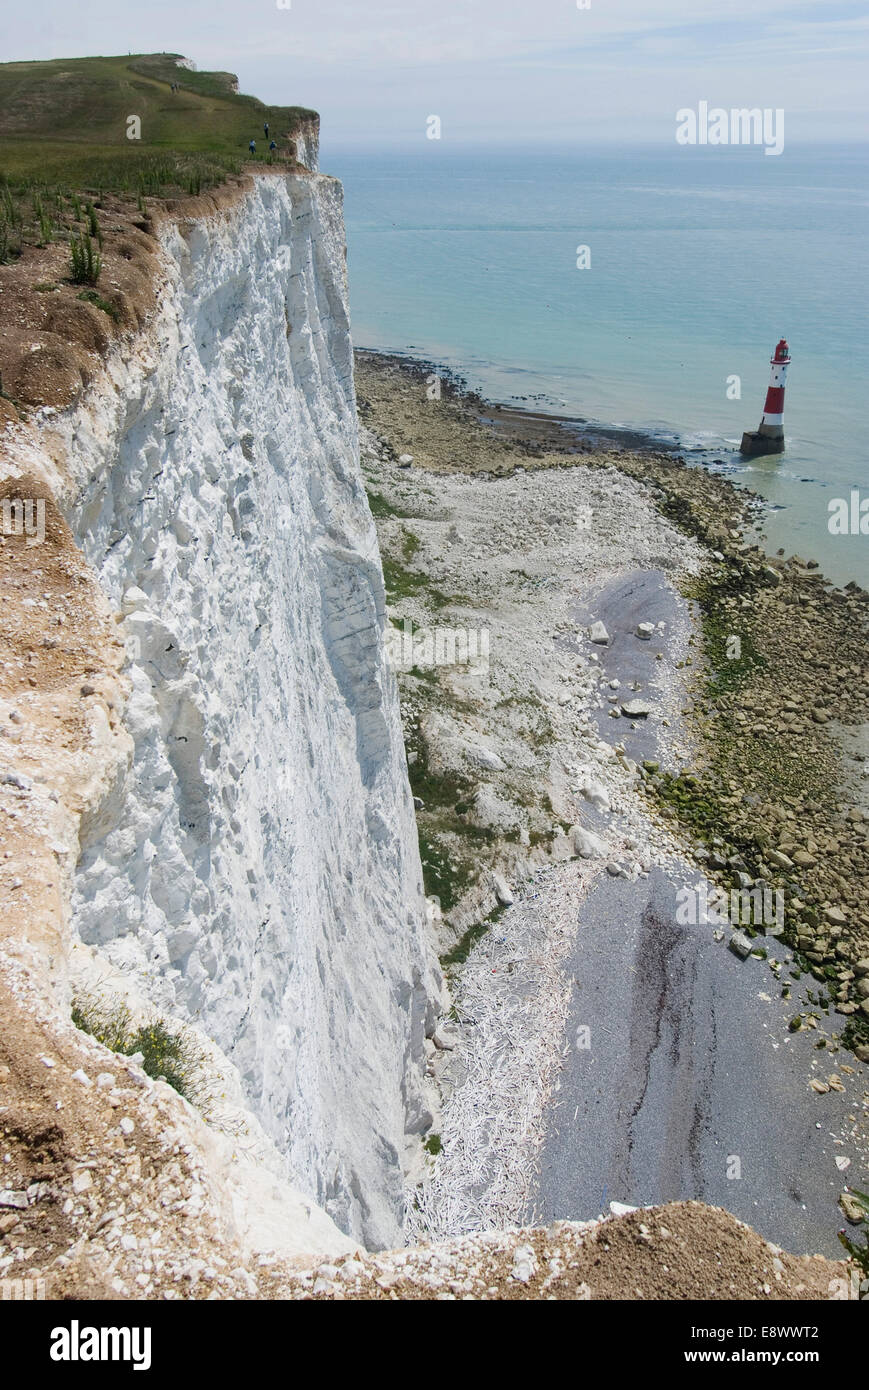 The White Cliffs of Beachy Head (dramatic cliff and famous suicide spot) with lighthouse beyond, East Sussex, England Stock Photo